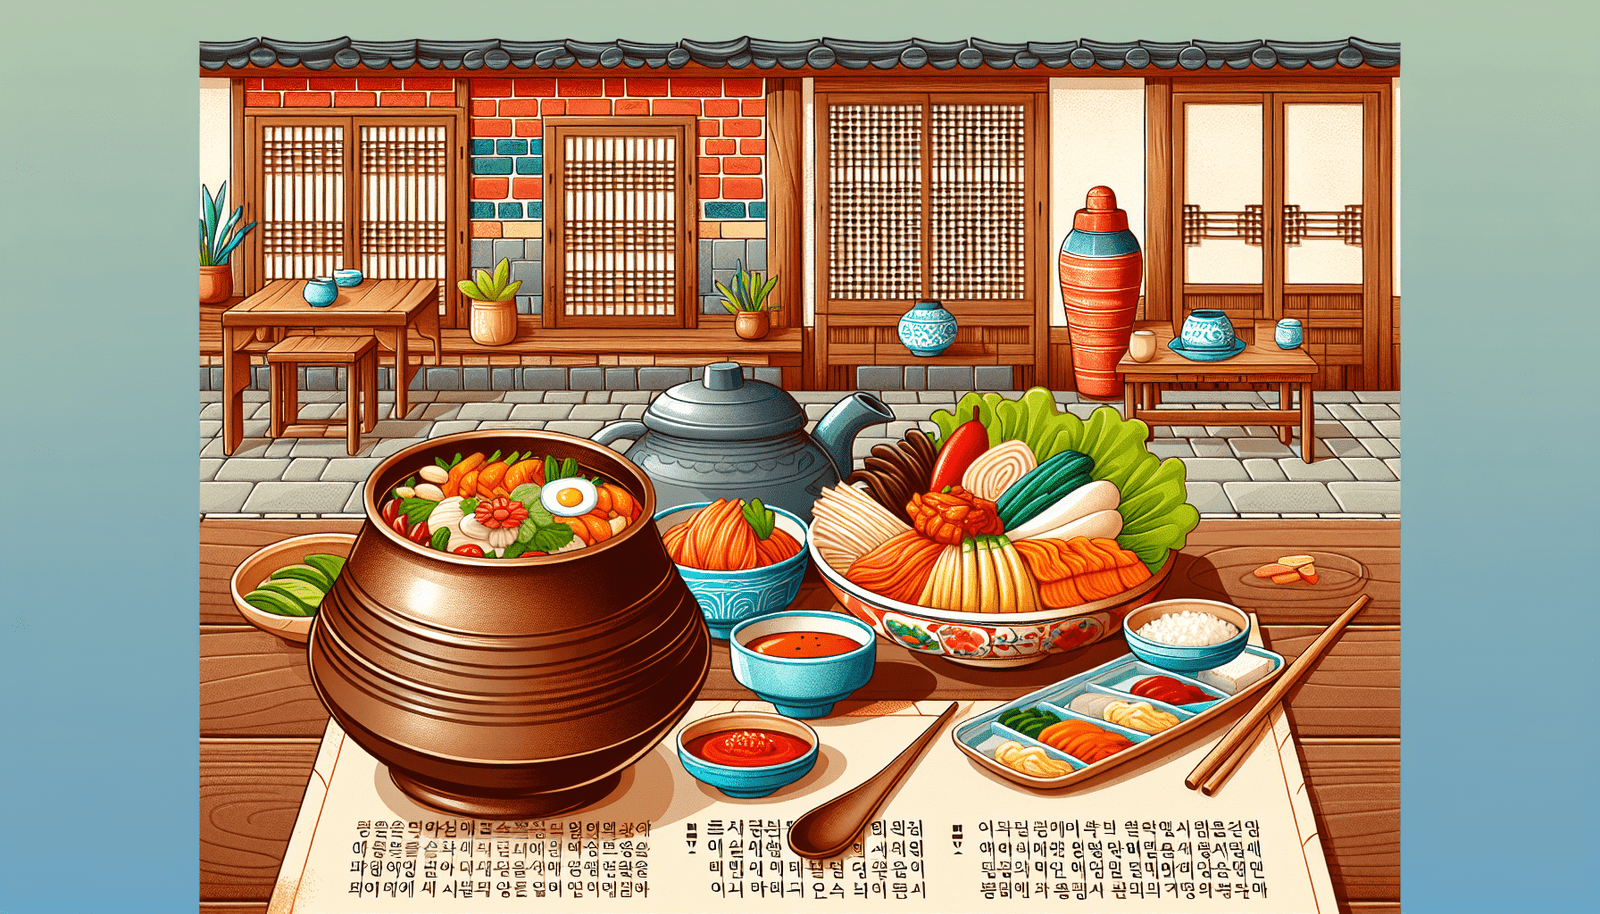 Can You Share Stories About The Historical Significance Of Certain Korean Dishes?